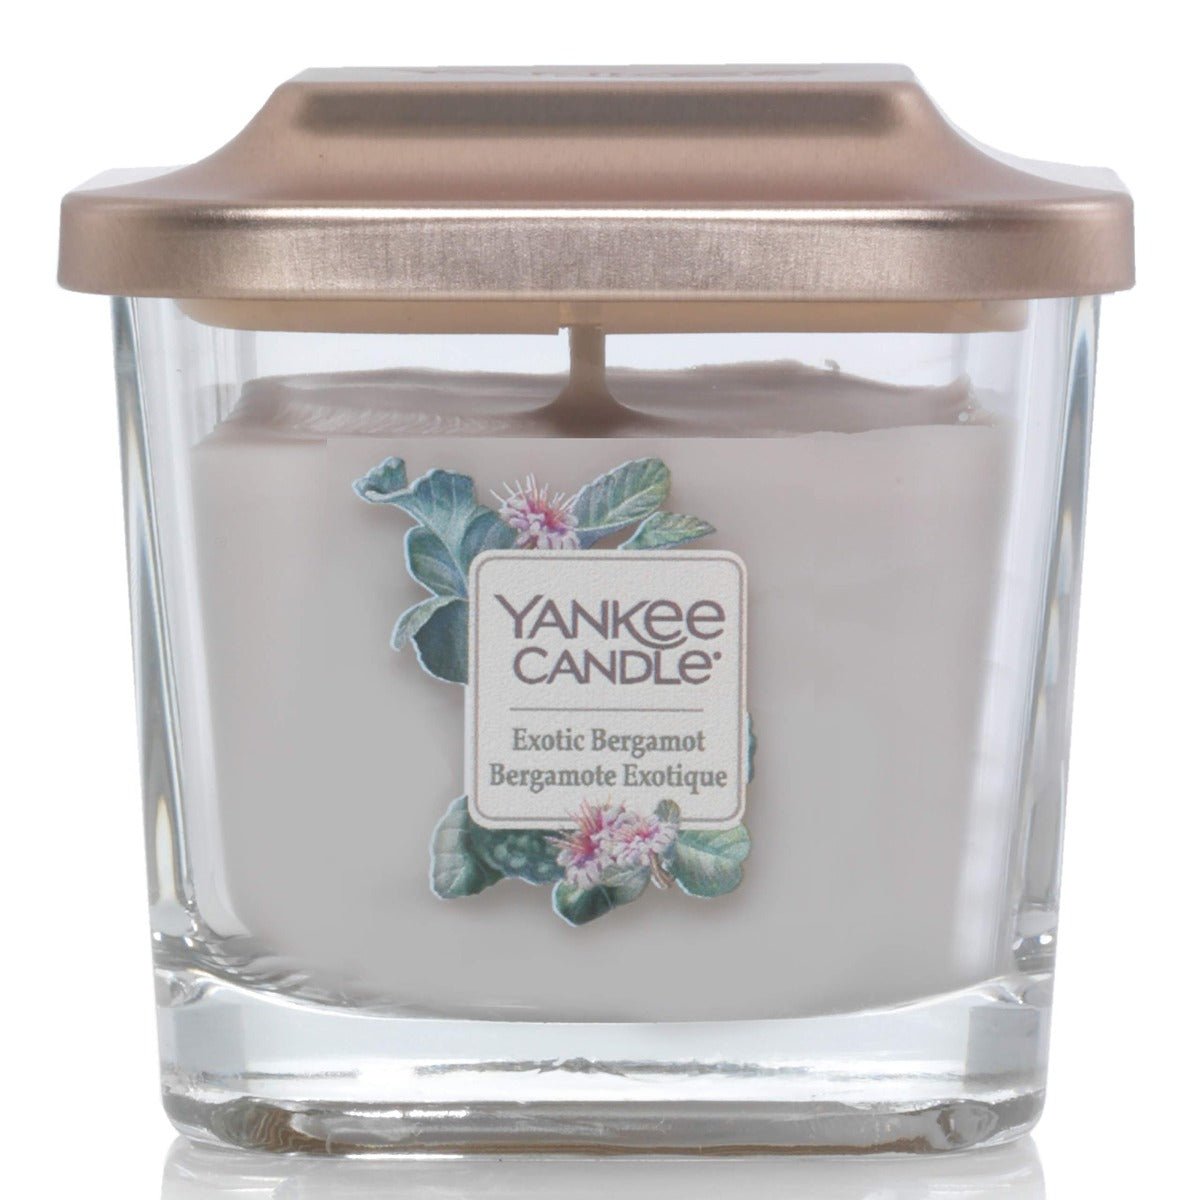 Yankee Candle Elevation Limited Edition Small Exotic Bergamot 96G - AllurebeautypkYankee Candle Elevation Limited Edition Small Exotic Bergamot 96G